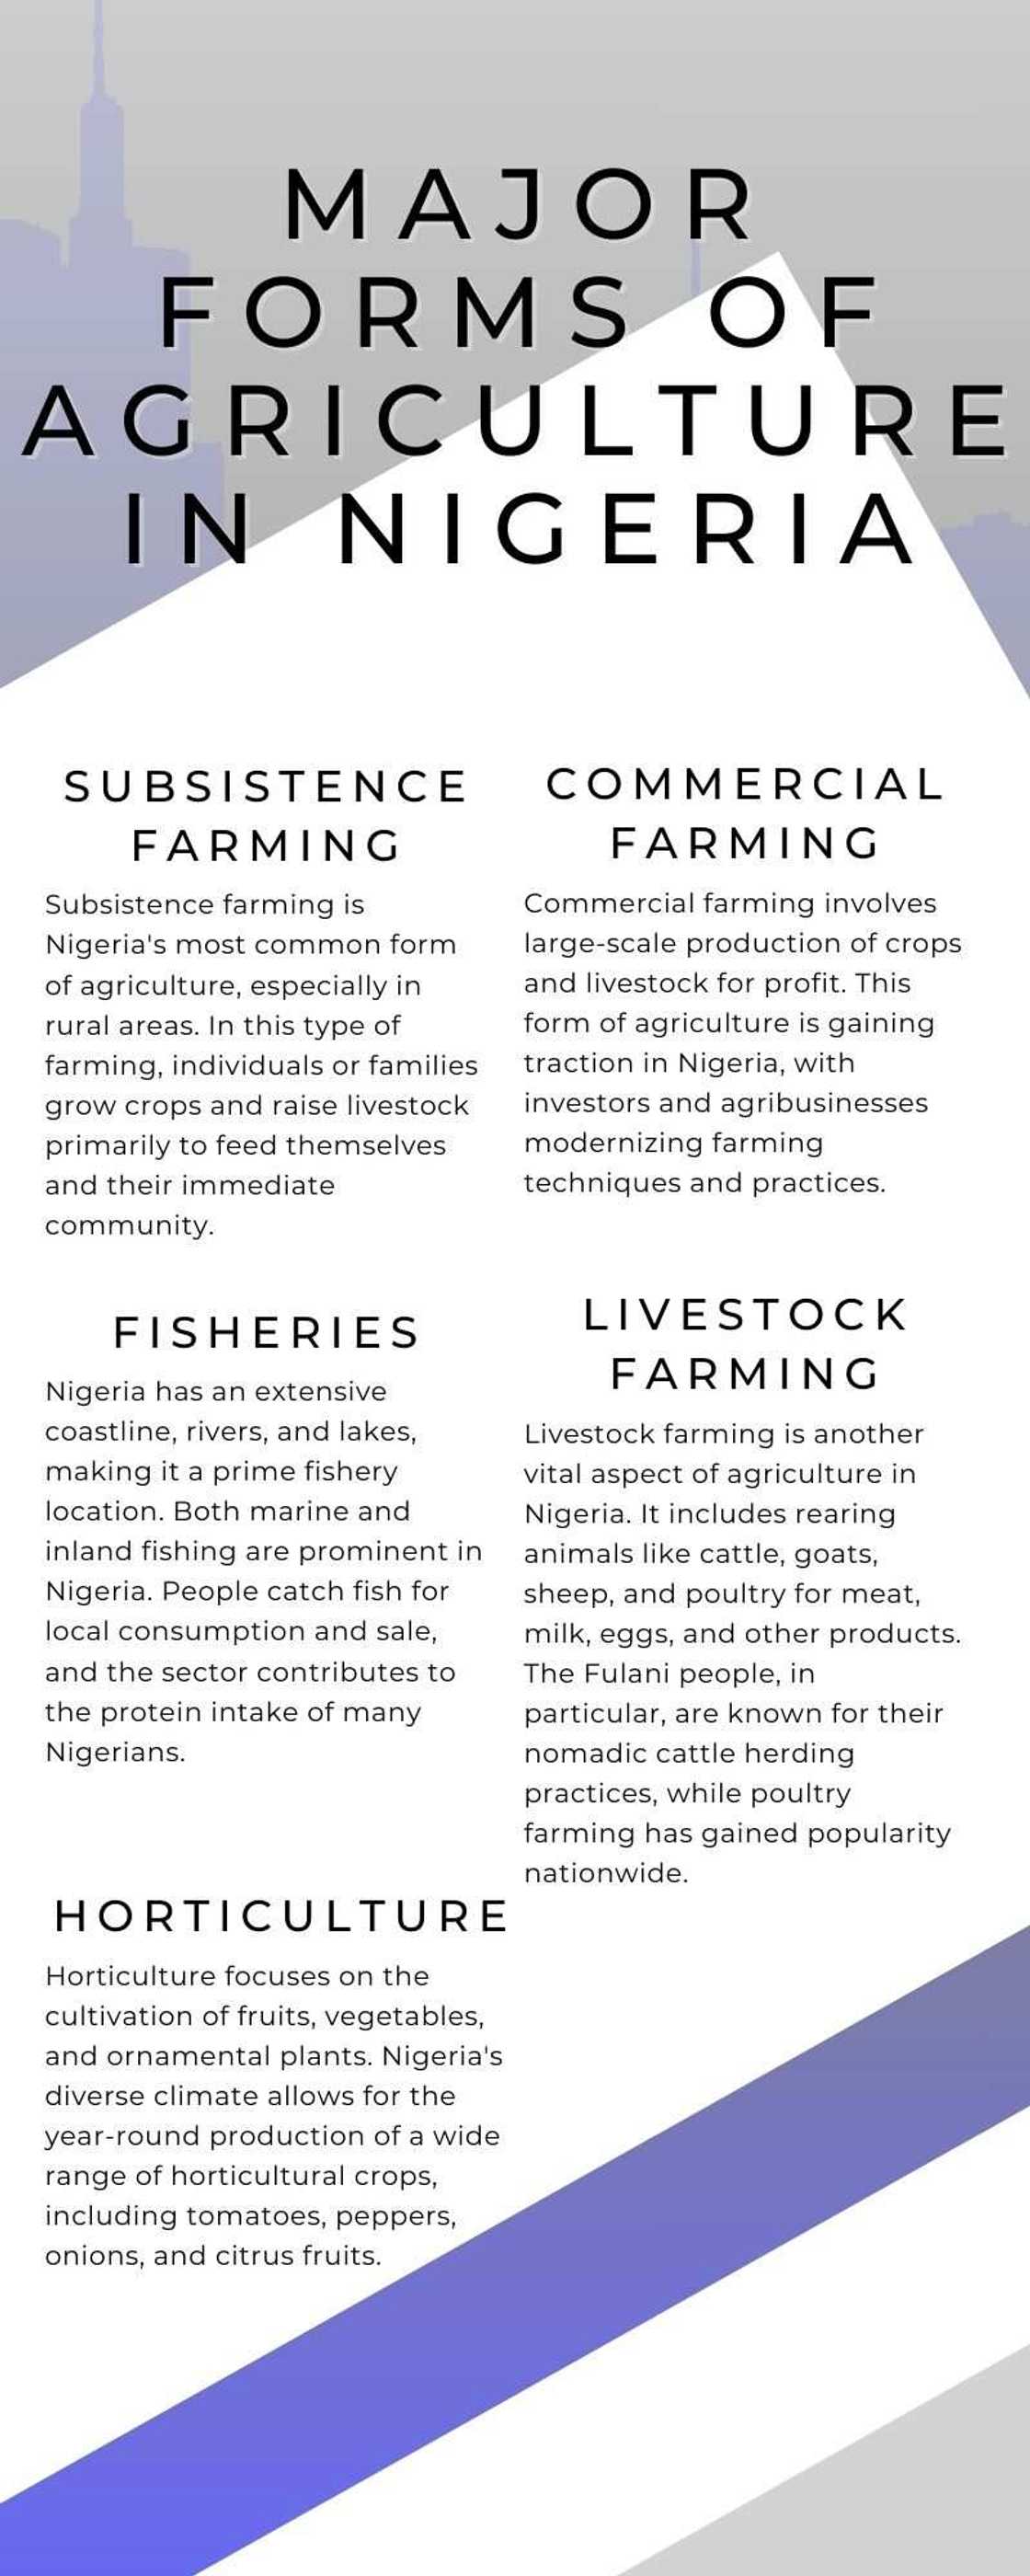 Major forms of agriculture in Nigeria